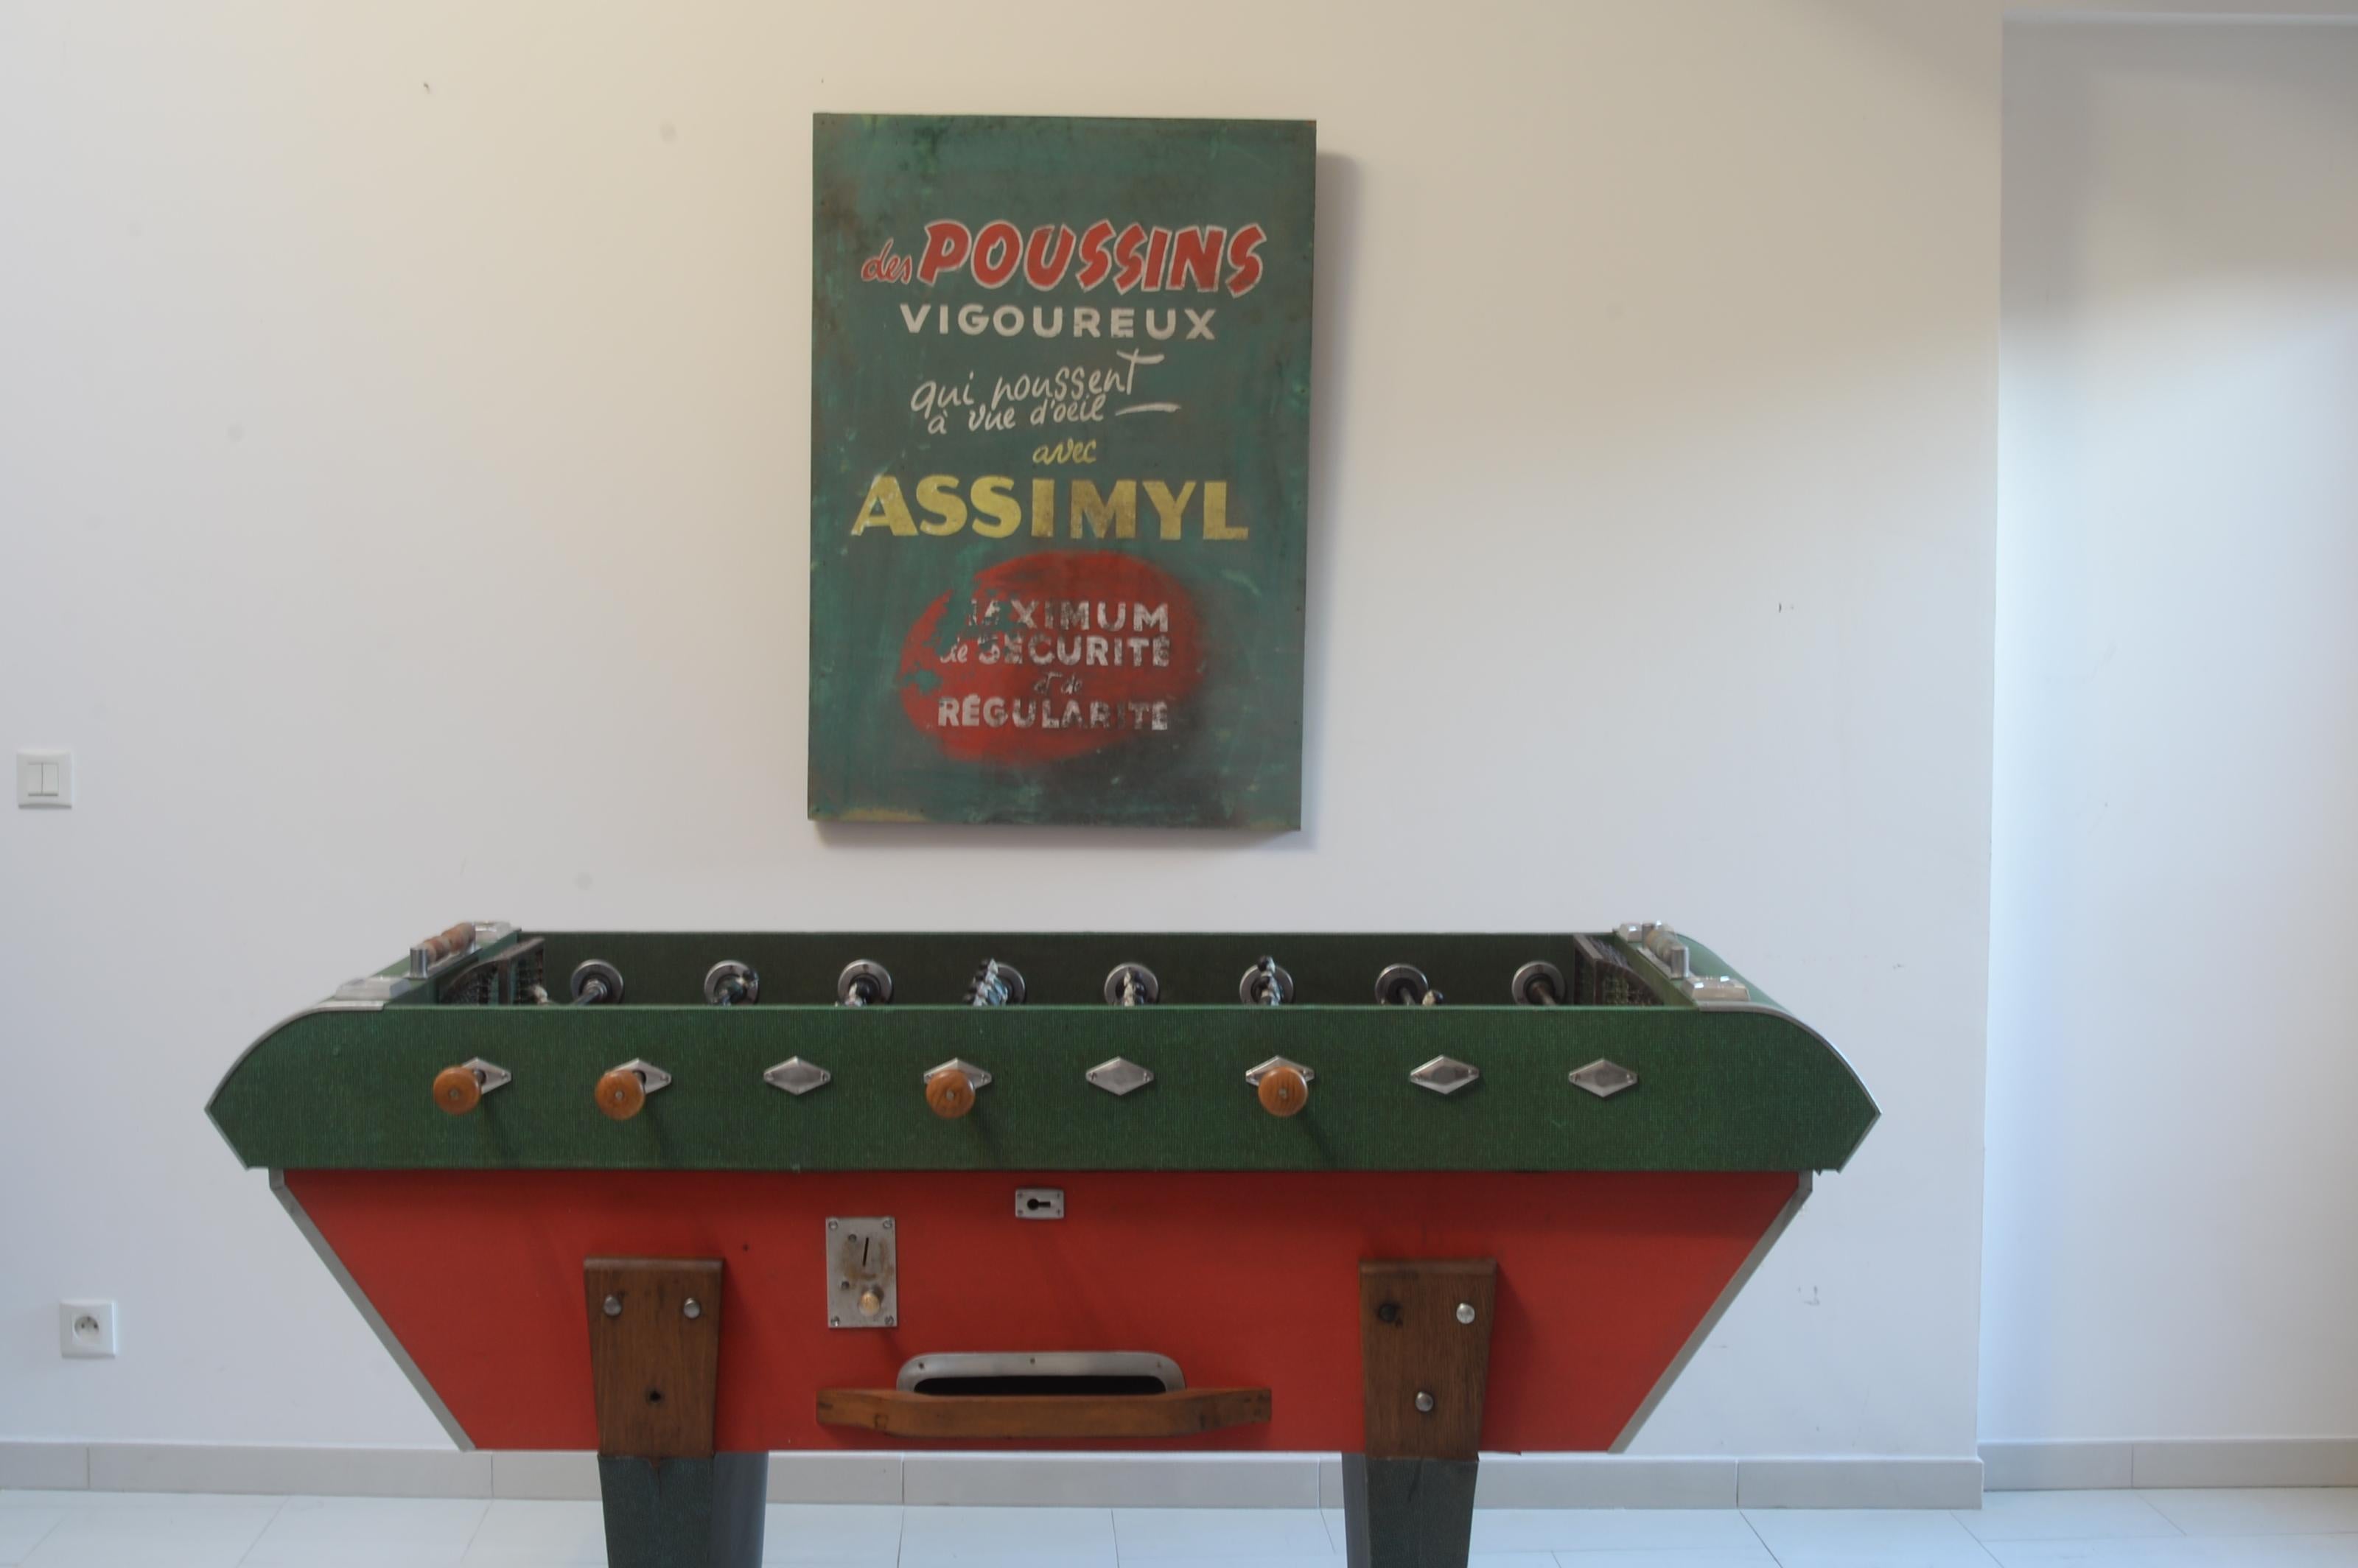 French Foosball collector By Bussoz complete, very good playability.
Completely original, the handles and shock absorbers are new and zinc rods angel.
Measures: Length 180 cm
Width 105 cm
Seat height 95 cm
Steel, aluminum, wood, oak, cast iron,